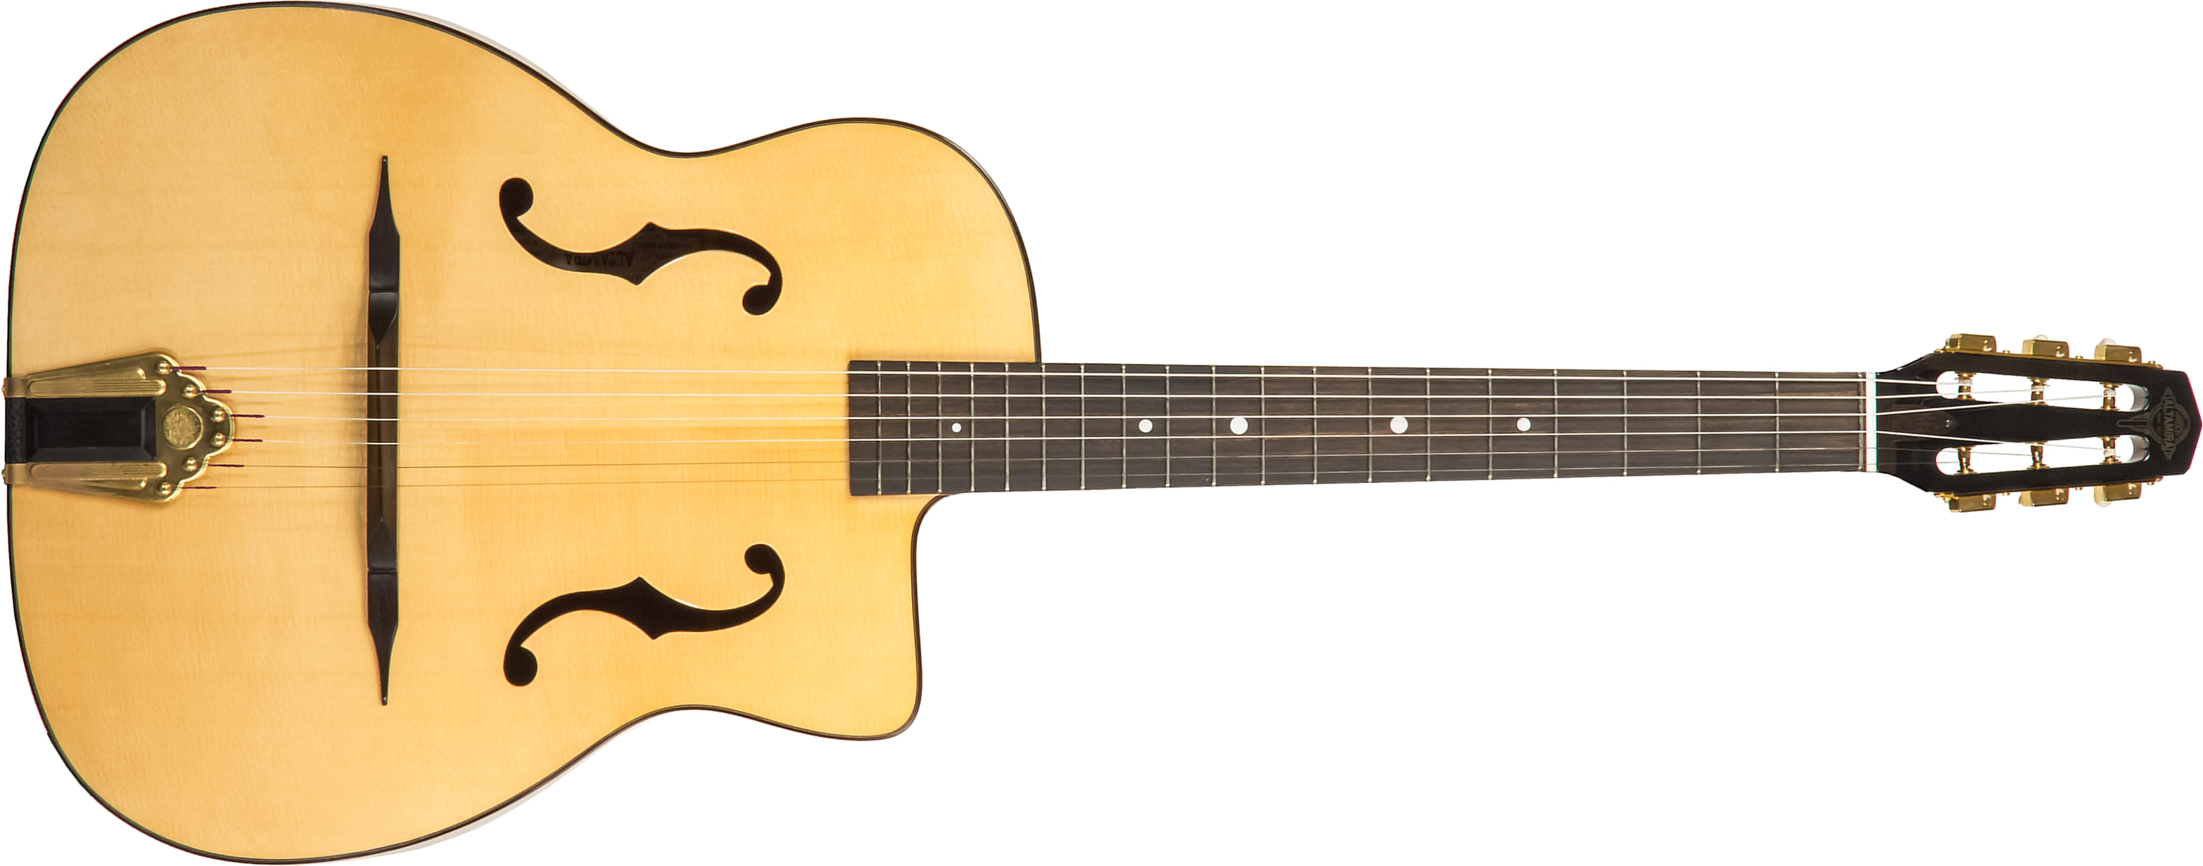 Altamira M01f Gypsy Jazz Cw Epicea Palissandre Eb - Natural Gloss - Gipsy gitaar - Main picture